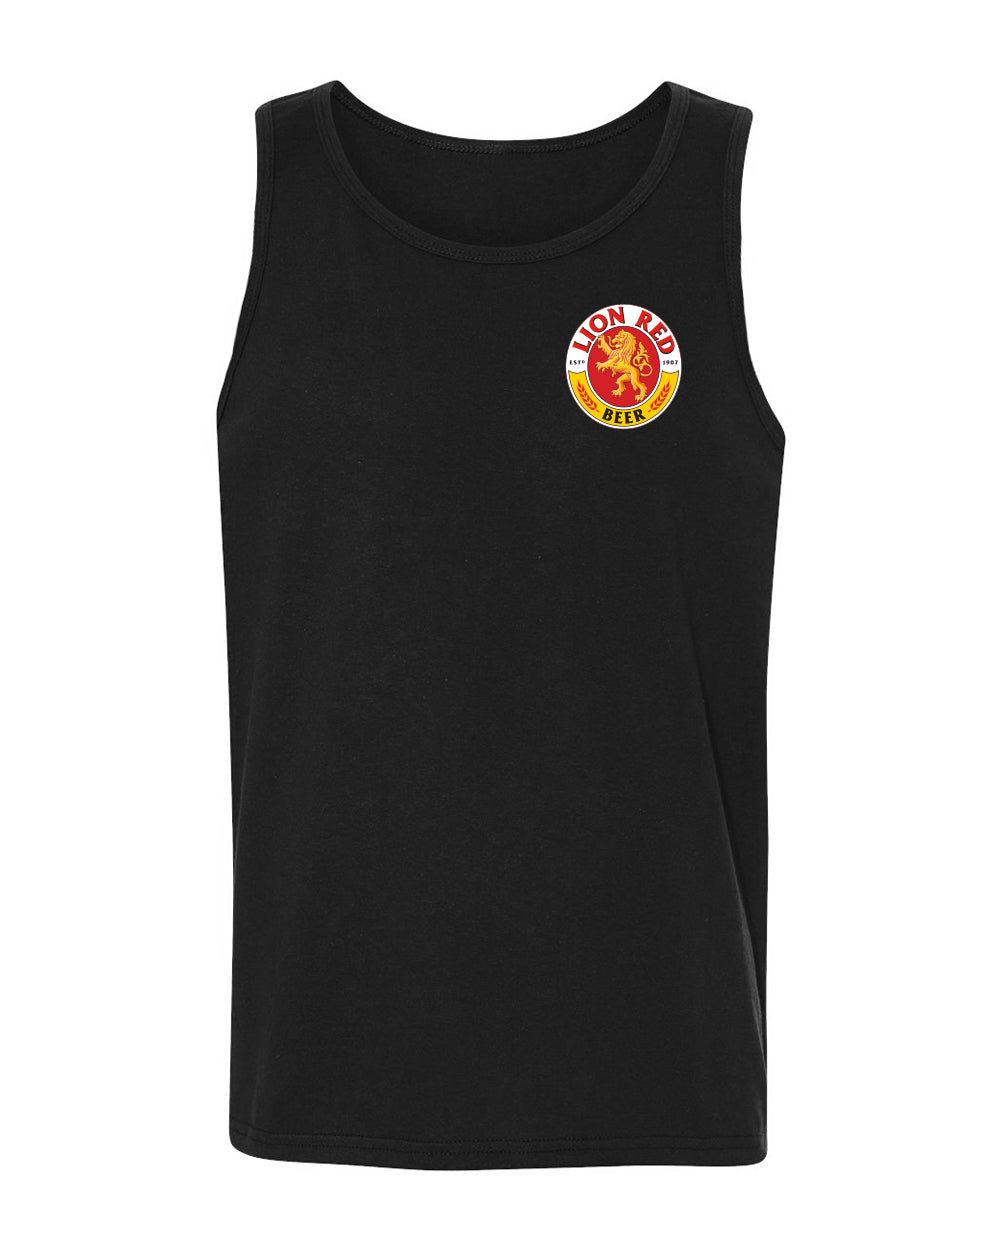 Lion Red Singlet Rondel -  Beer Gear Apparel & Merchandise - Speights - Lion Red - VB - Tokyo Dy merch